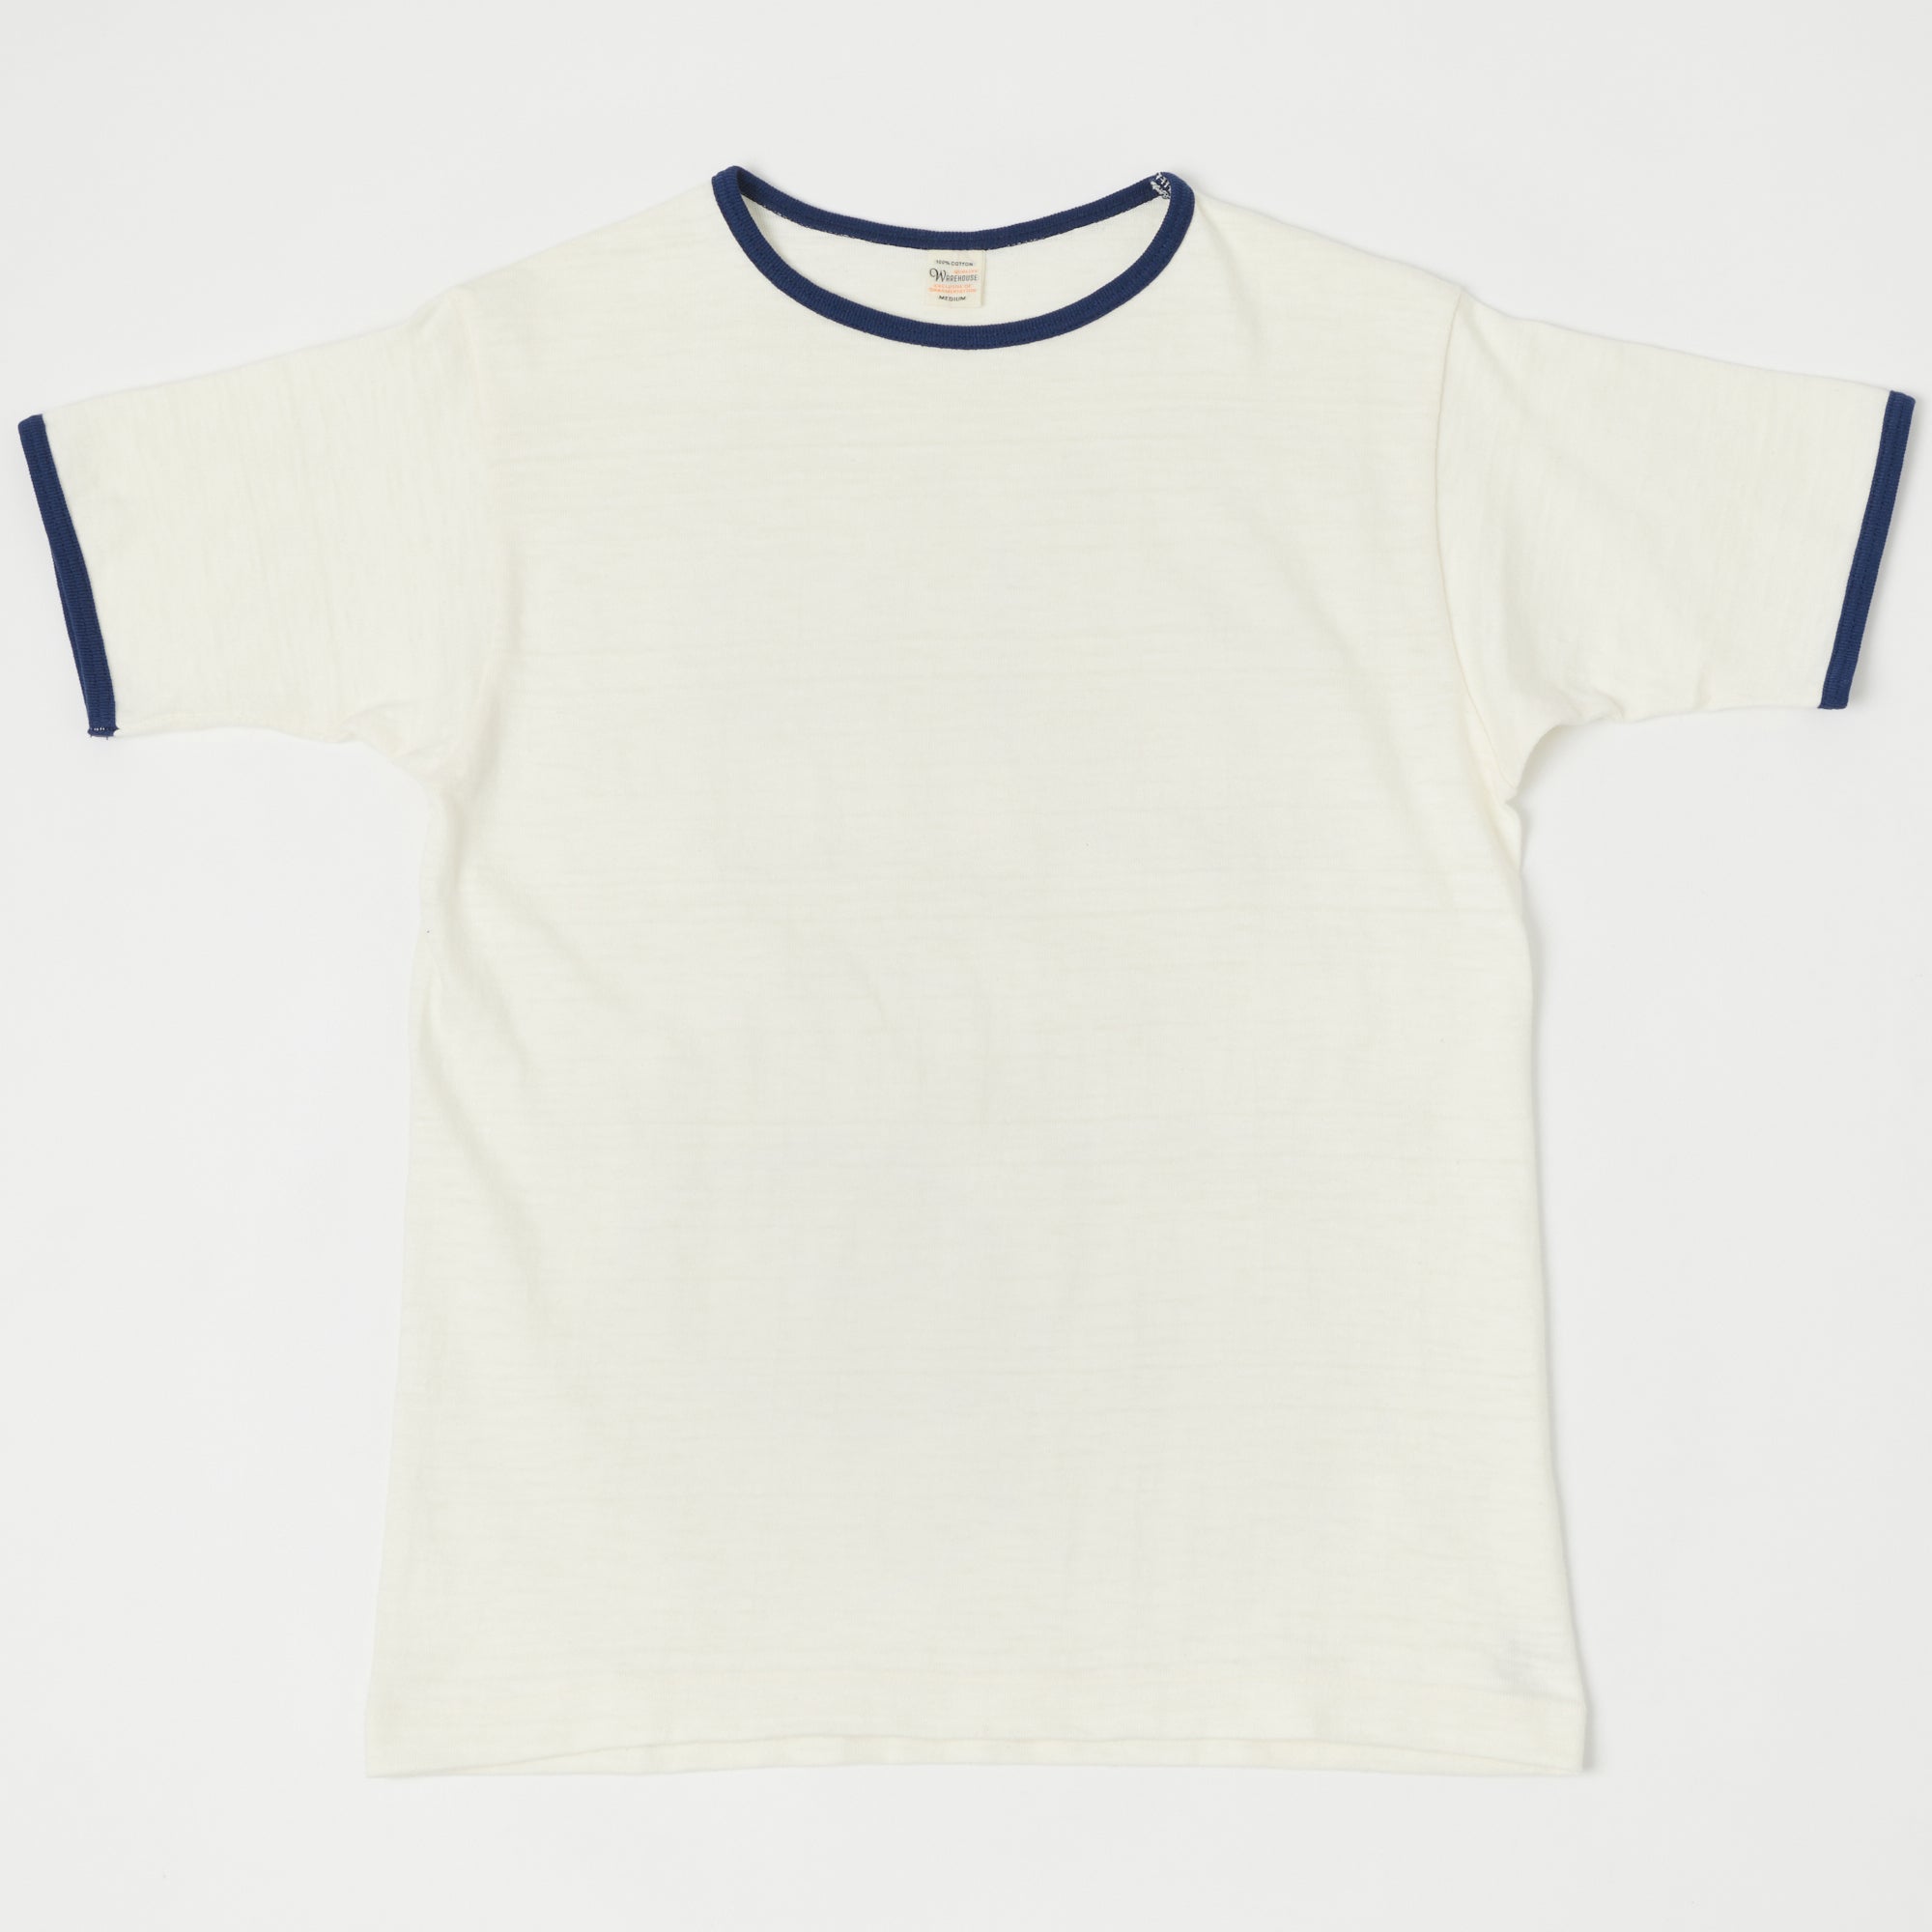 Warehouse 4059 Ringer Tee - Cream/Navy | Son of a Stag